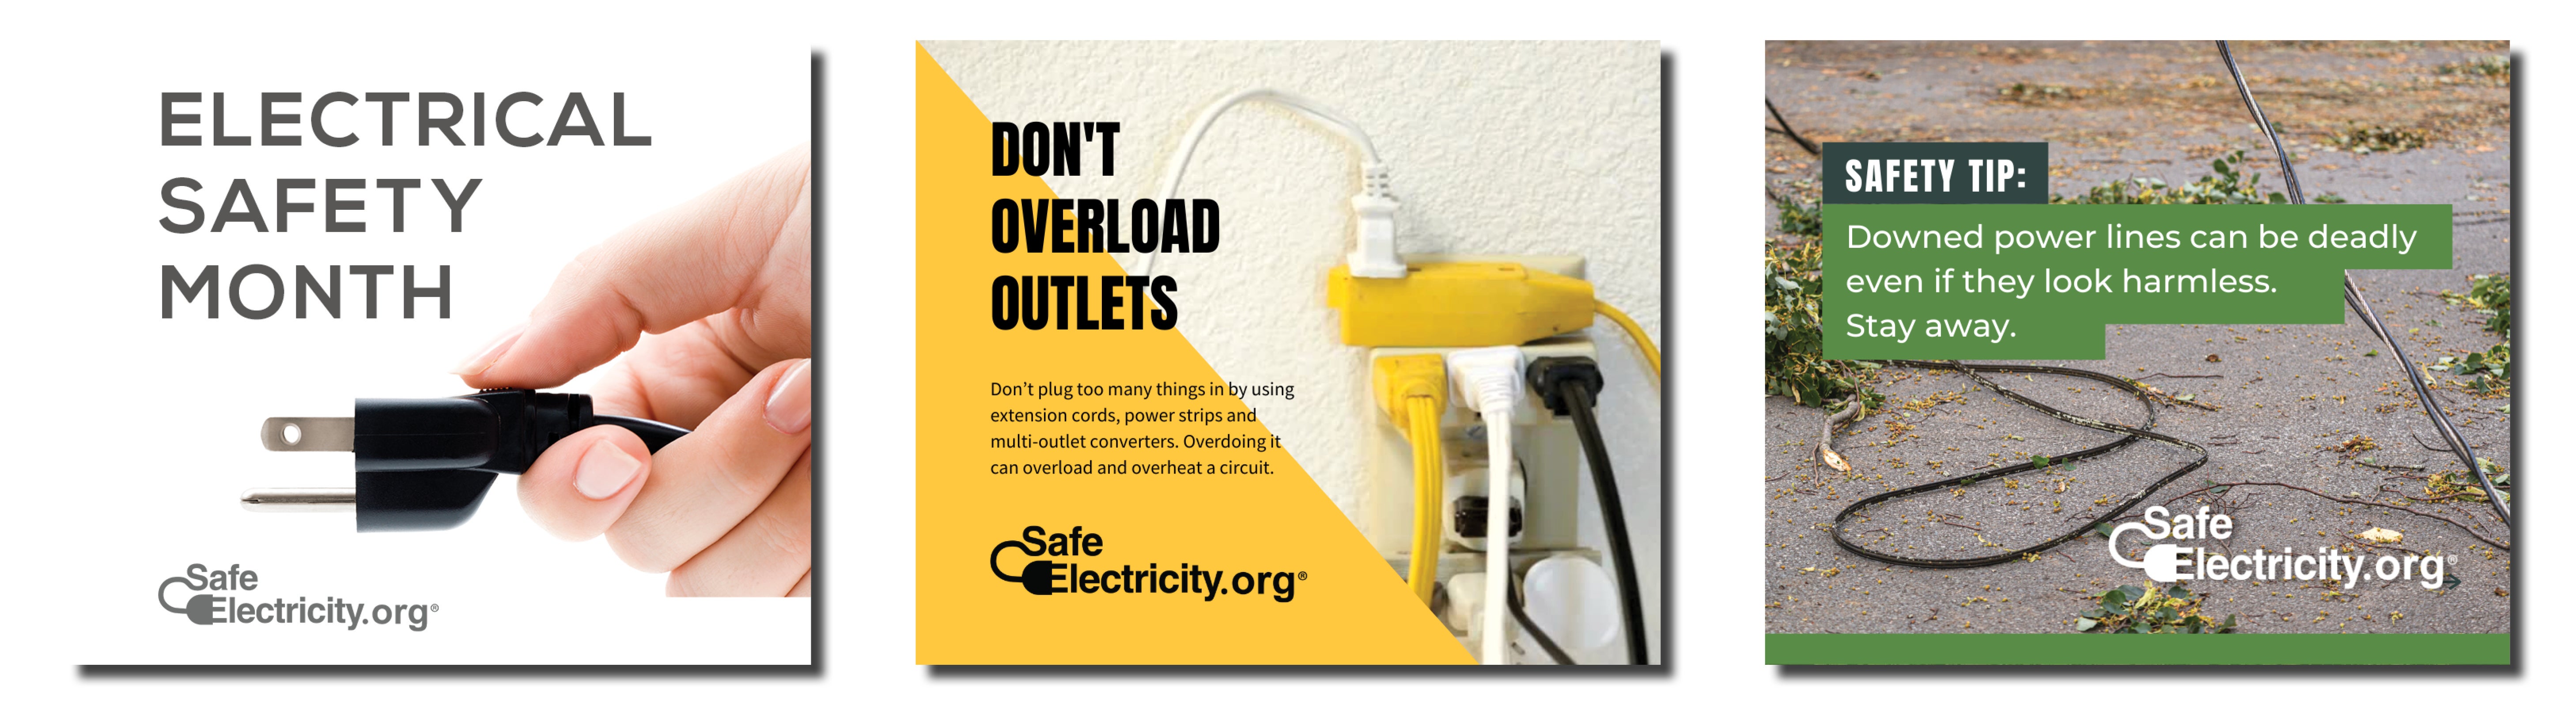 Electrical Safety Month. Don't overload outlets. Stay away from downed power lines. 